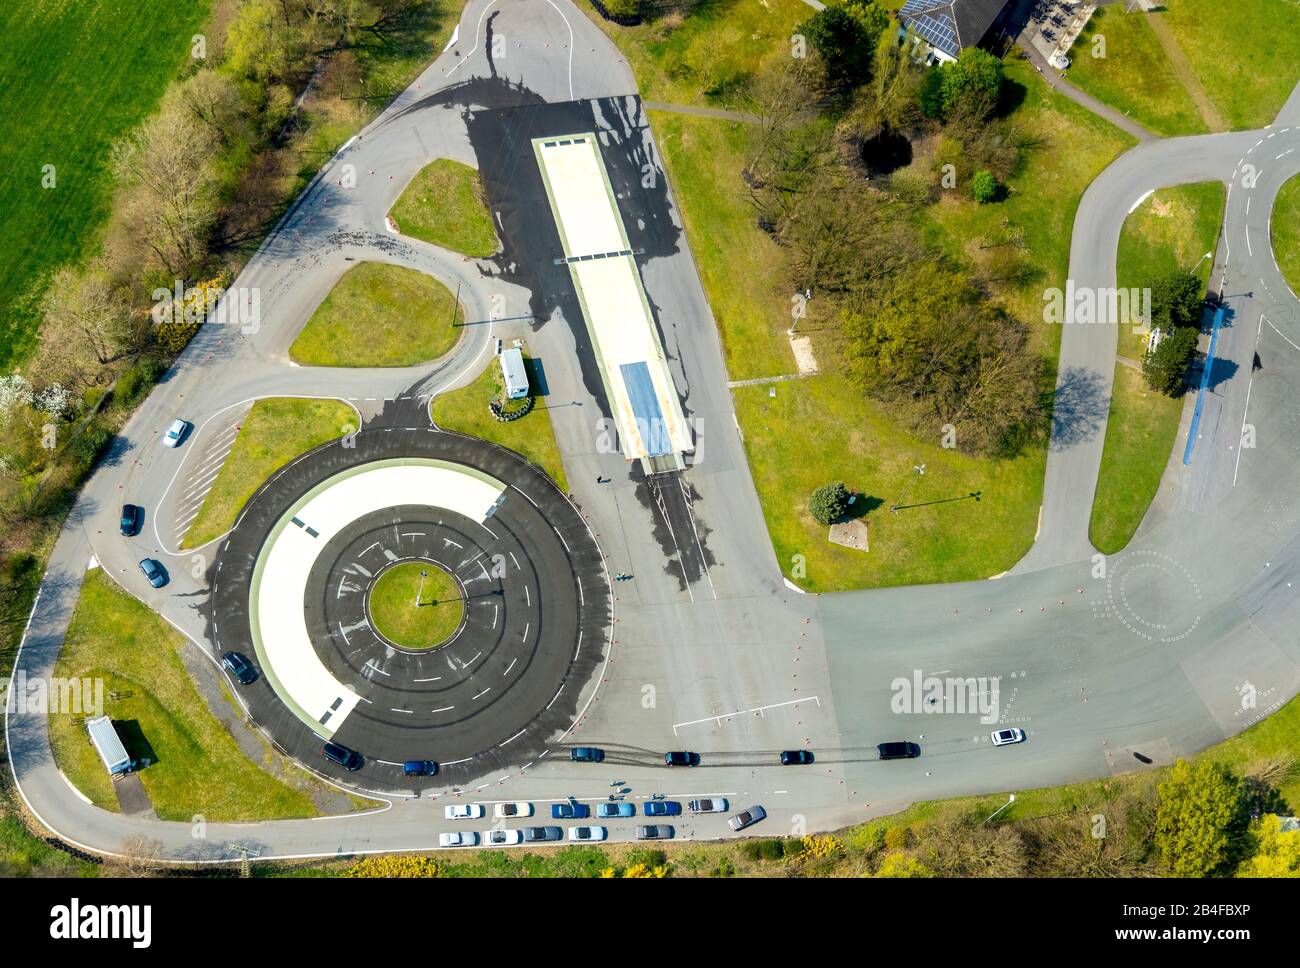 Aerial view of the ADAC driving safety center Haltern am See, traffic training course with spin course in Haltern am See in the Ruhr area in the state of North Rhine-Westphalia, Germany. Stock Photo